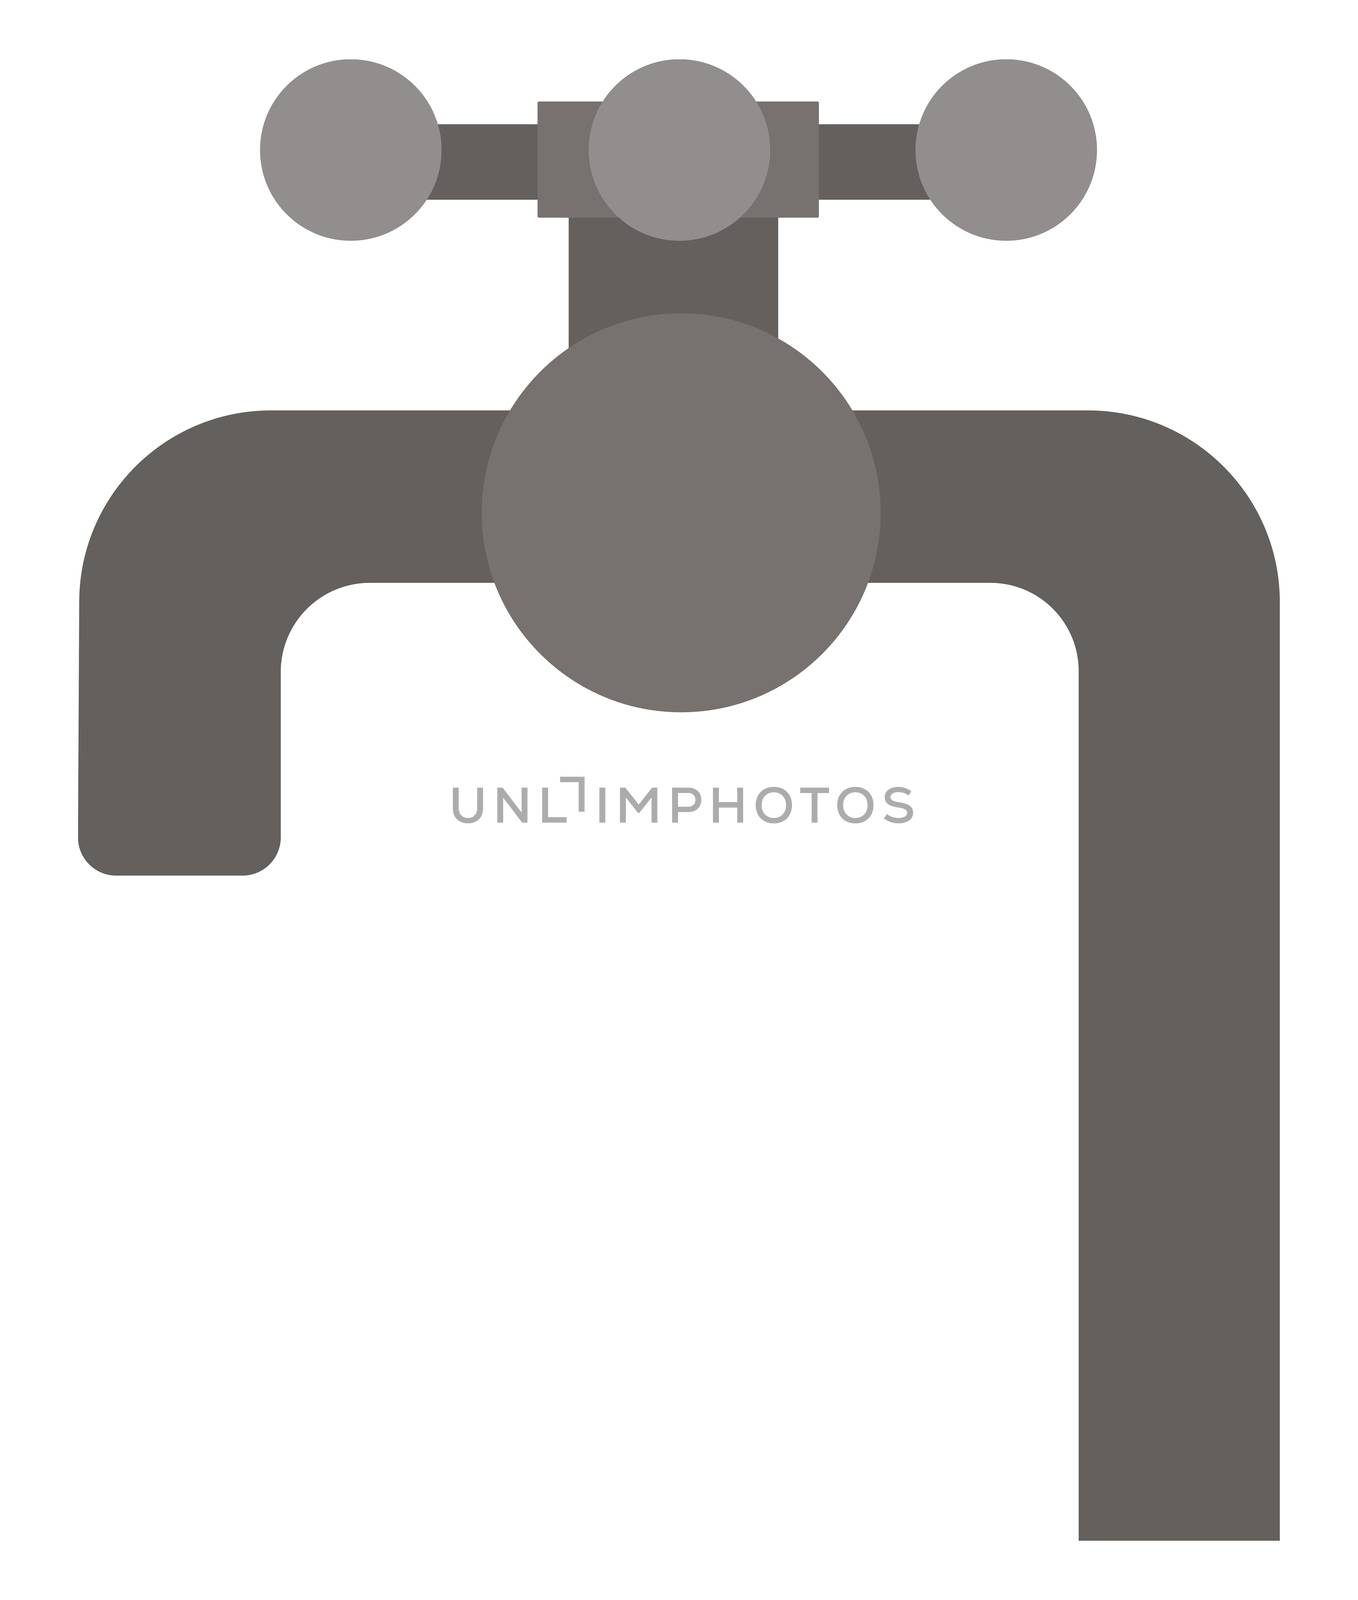 Water tap, illustration, vector on white background